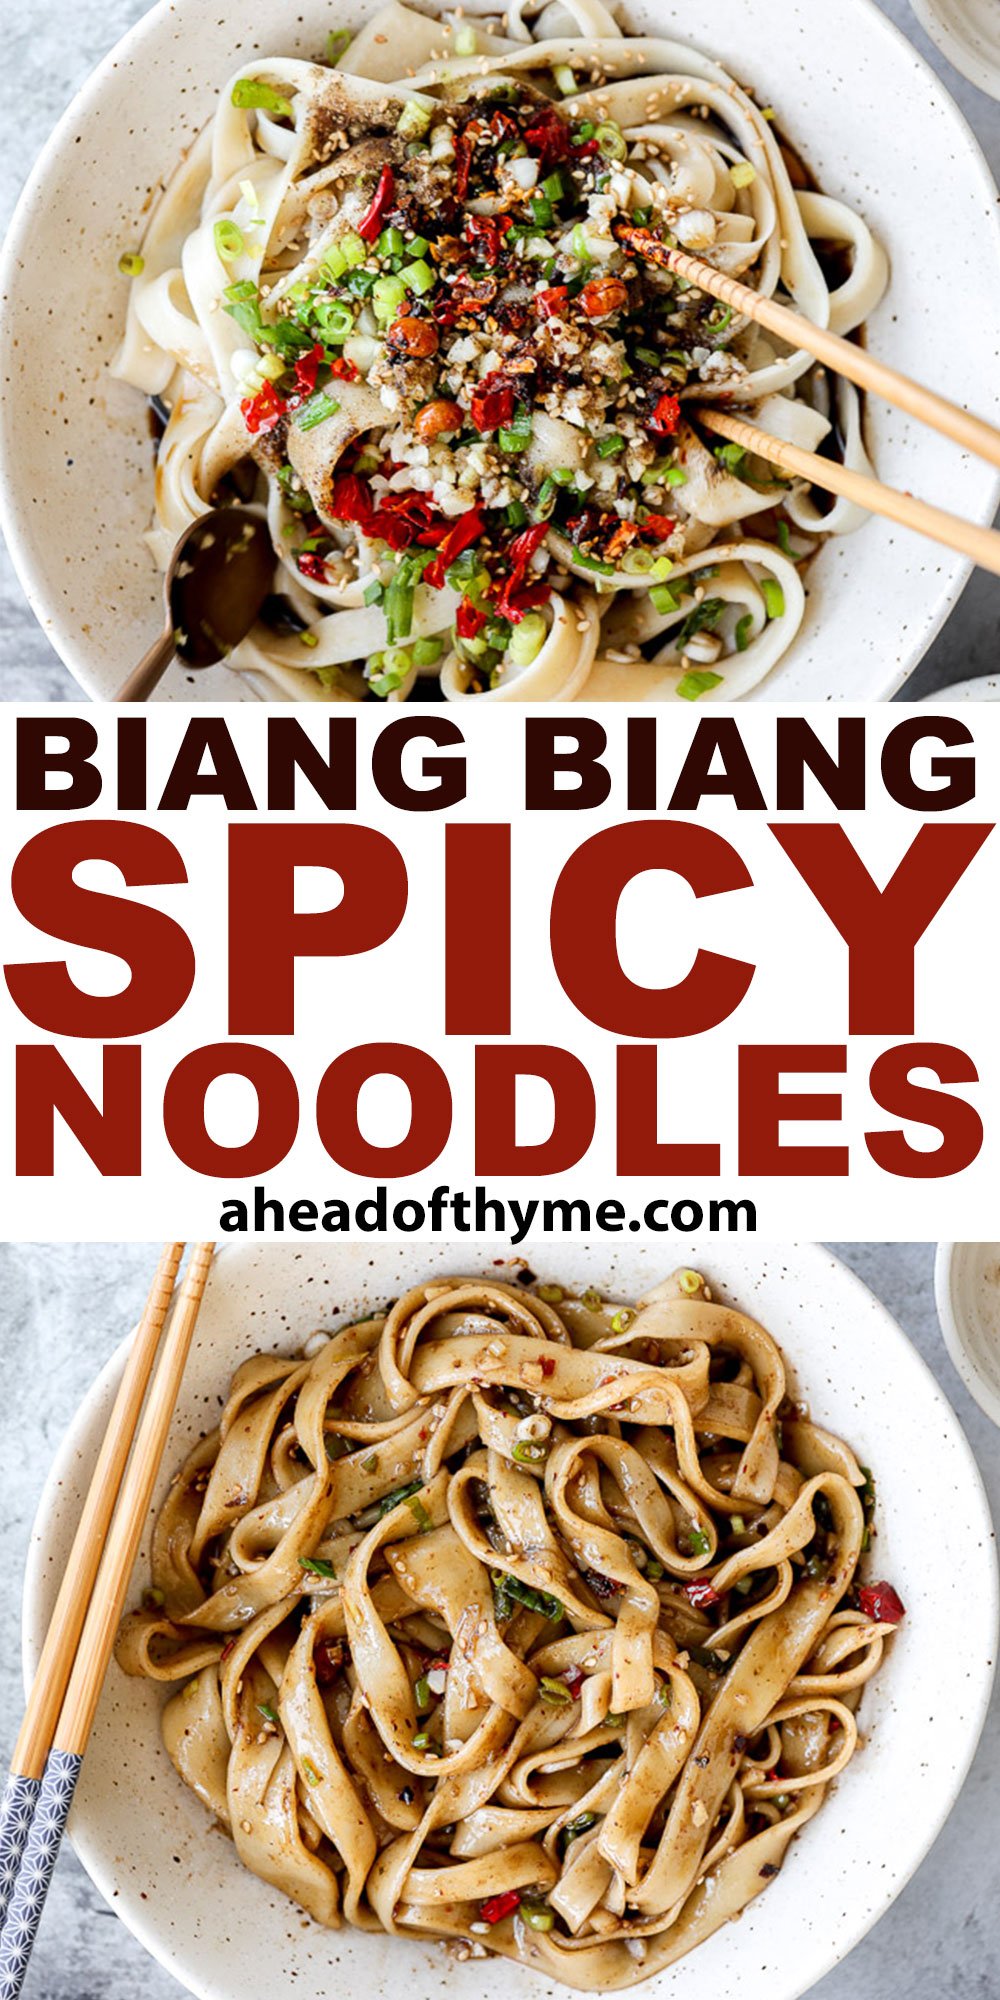 Biang Biang Spicy Noodles